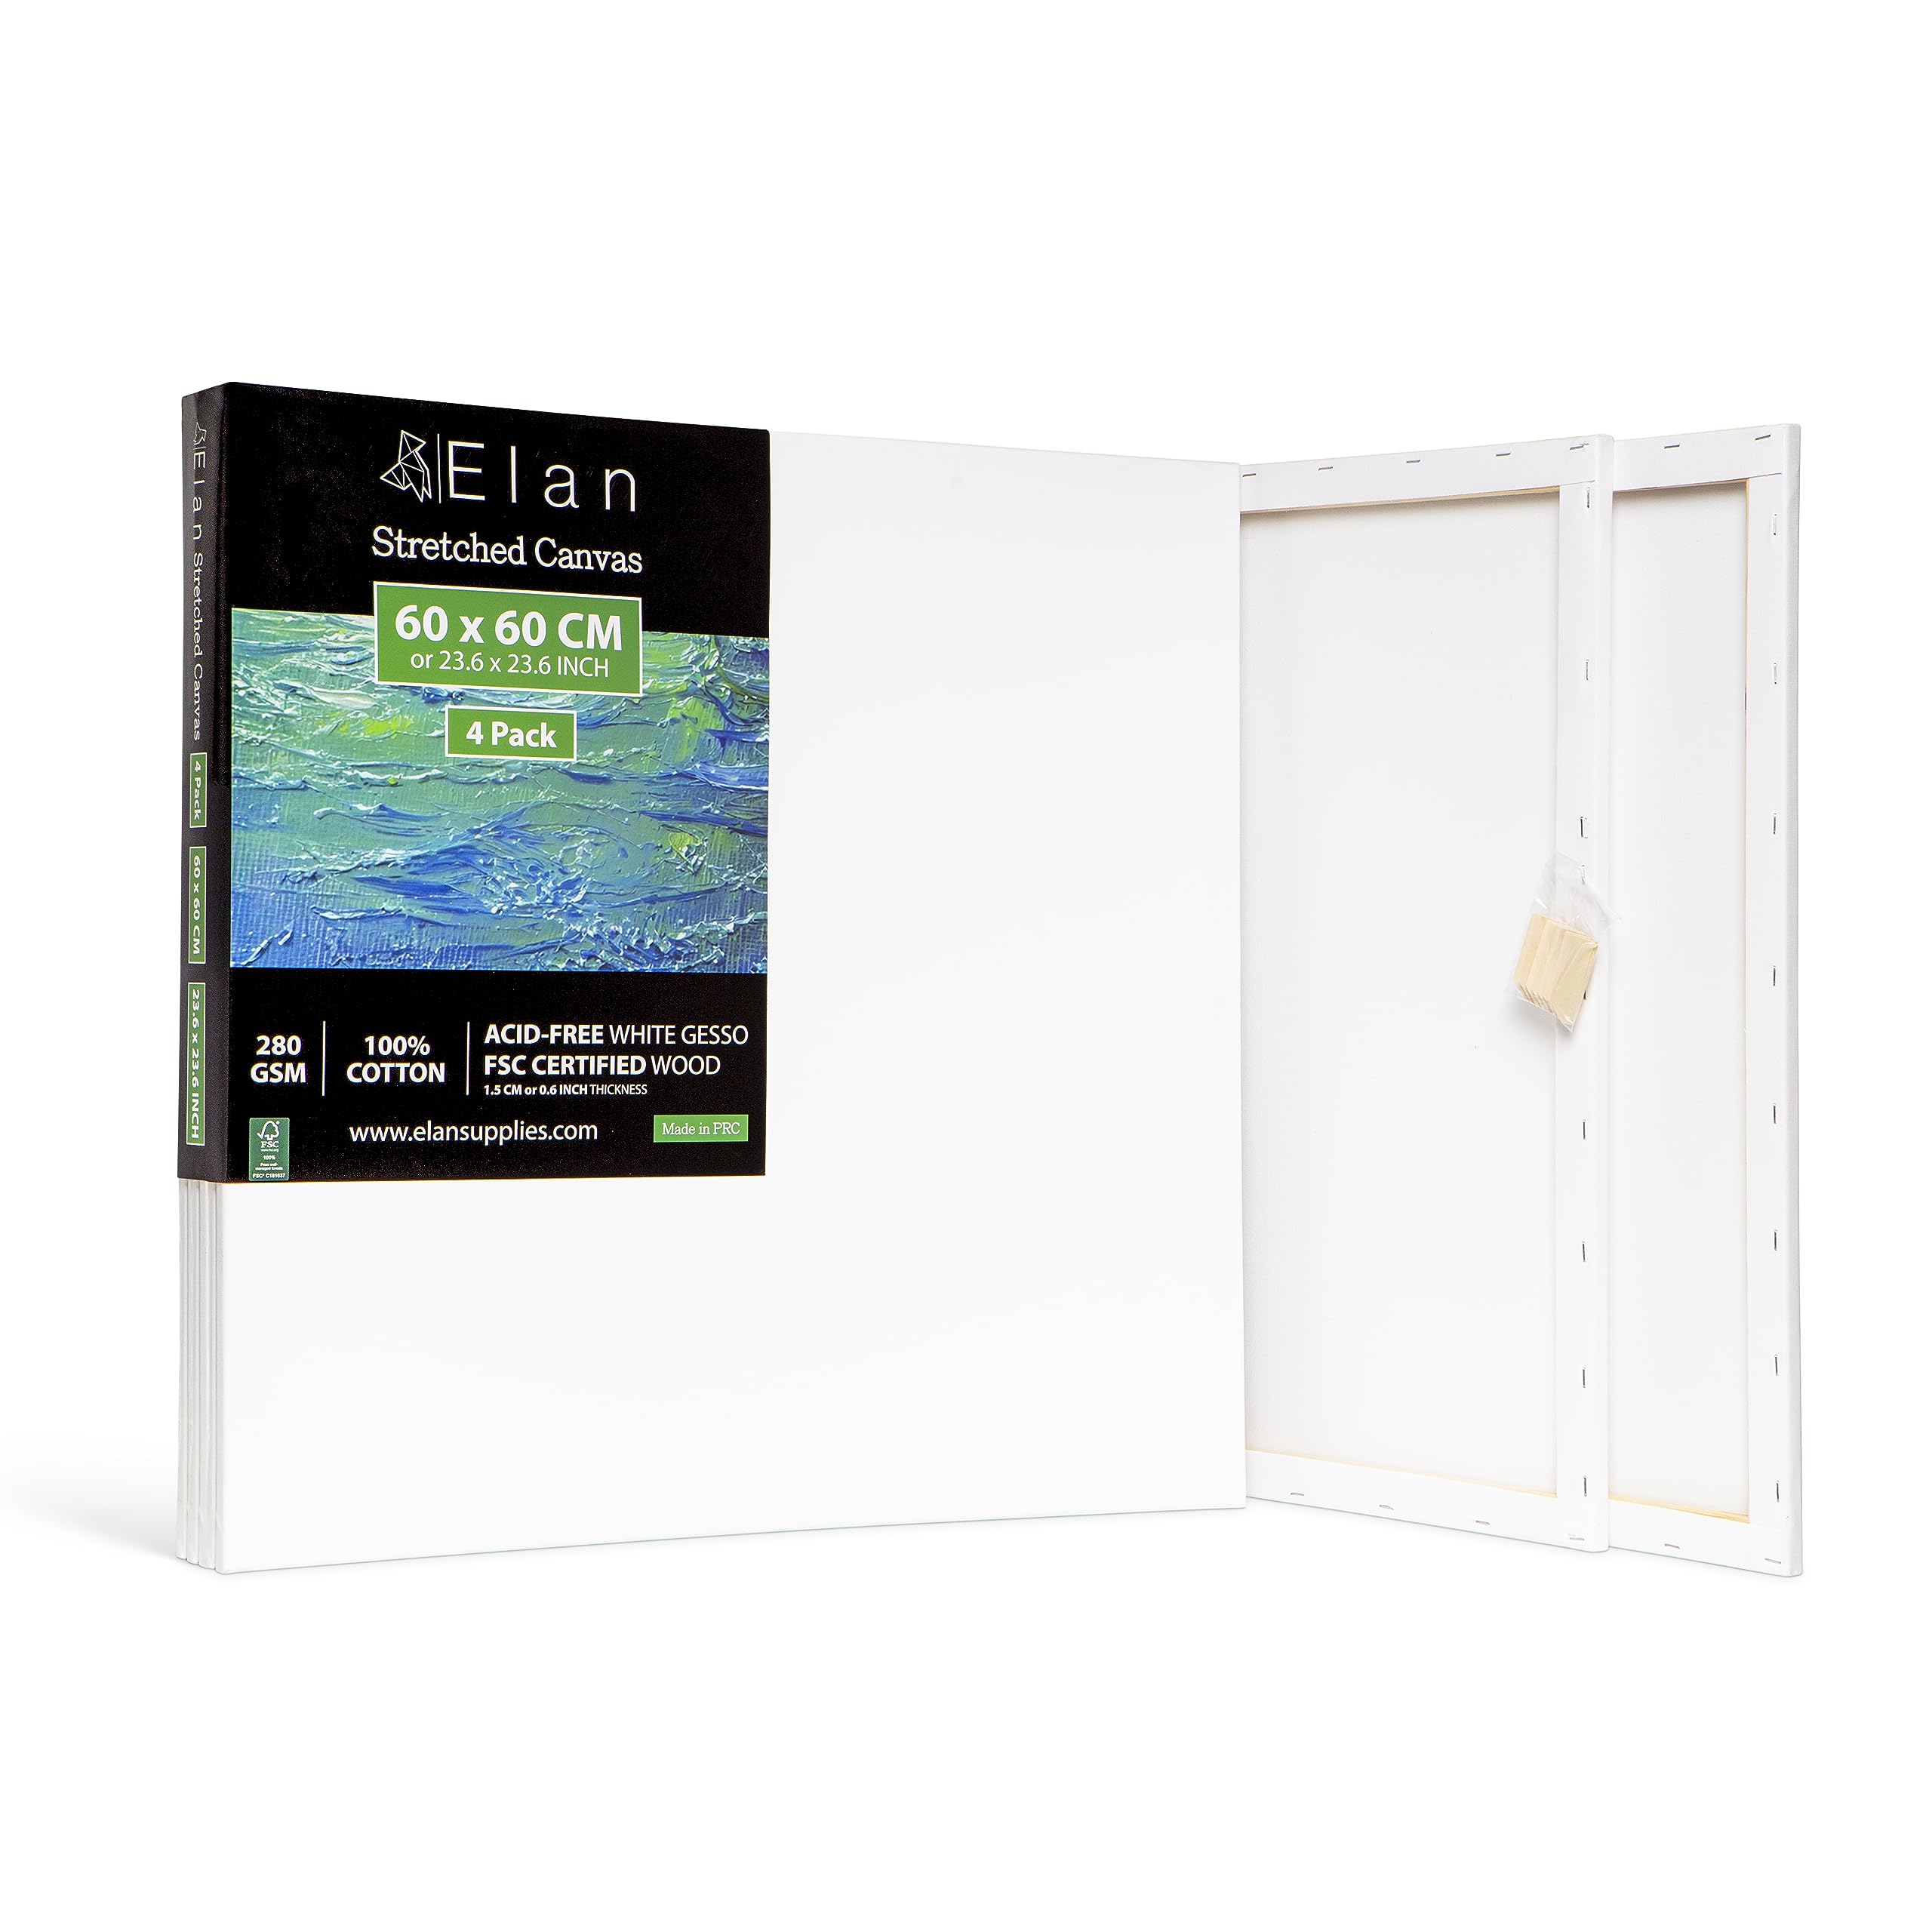 Elan Stretched Canvases 24x24, 4-Pack Canvases for Painting, Painting Canvas Bulk, Stretched Canvas for Adults Blank Canvas for Painting, Painting Canvases Paint Canvases for Painting Art Canvas